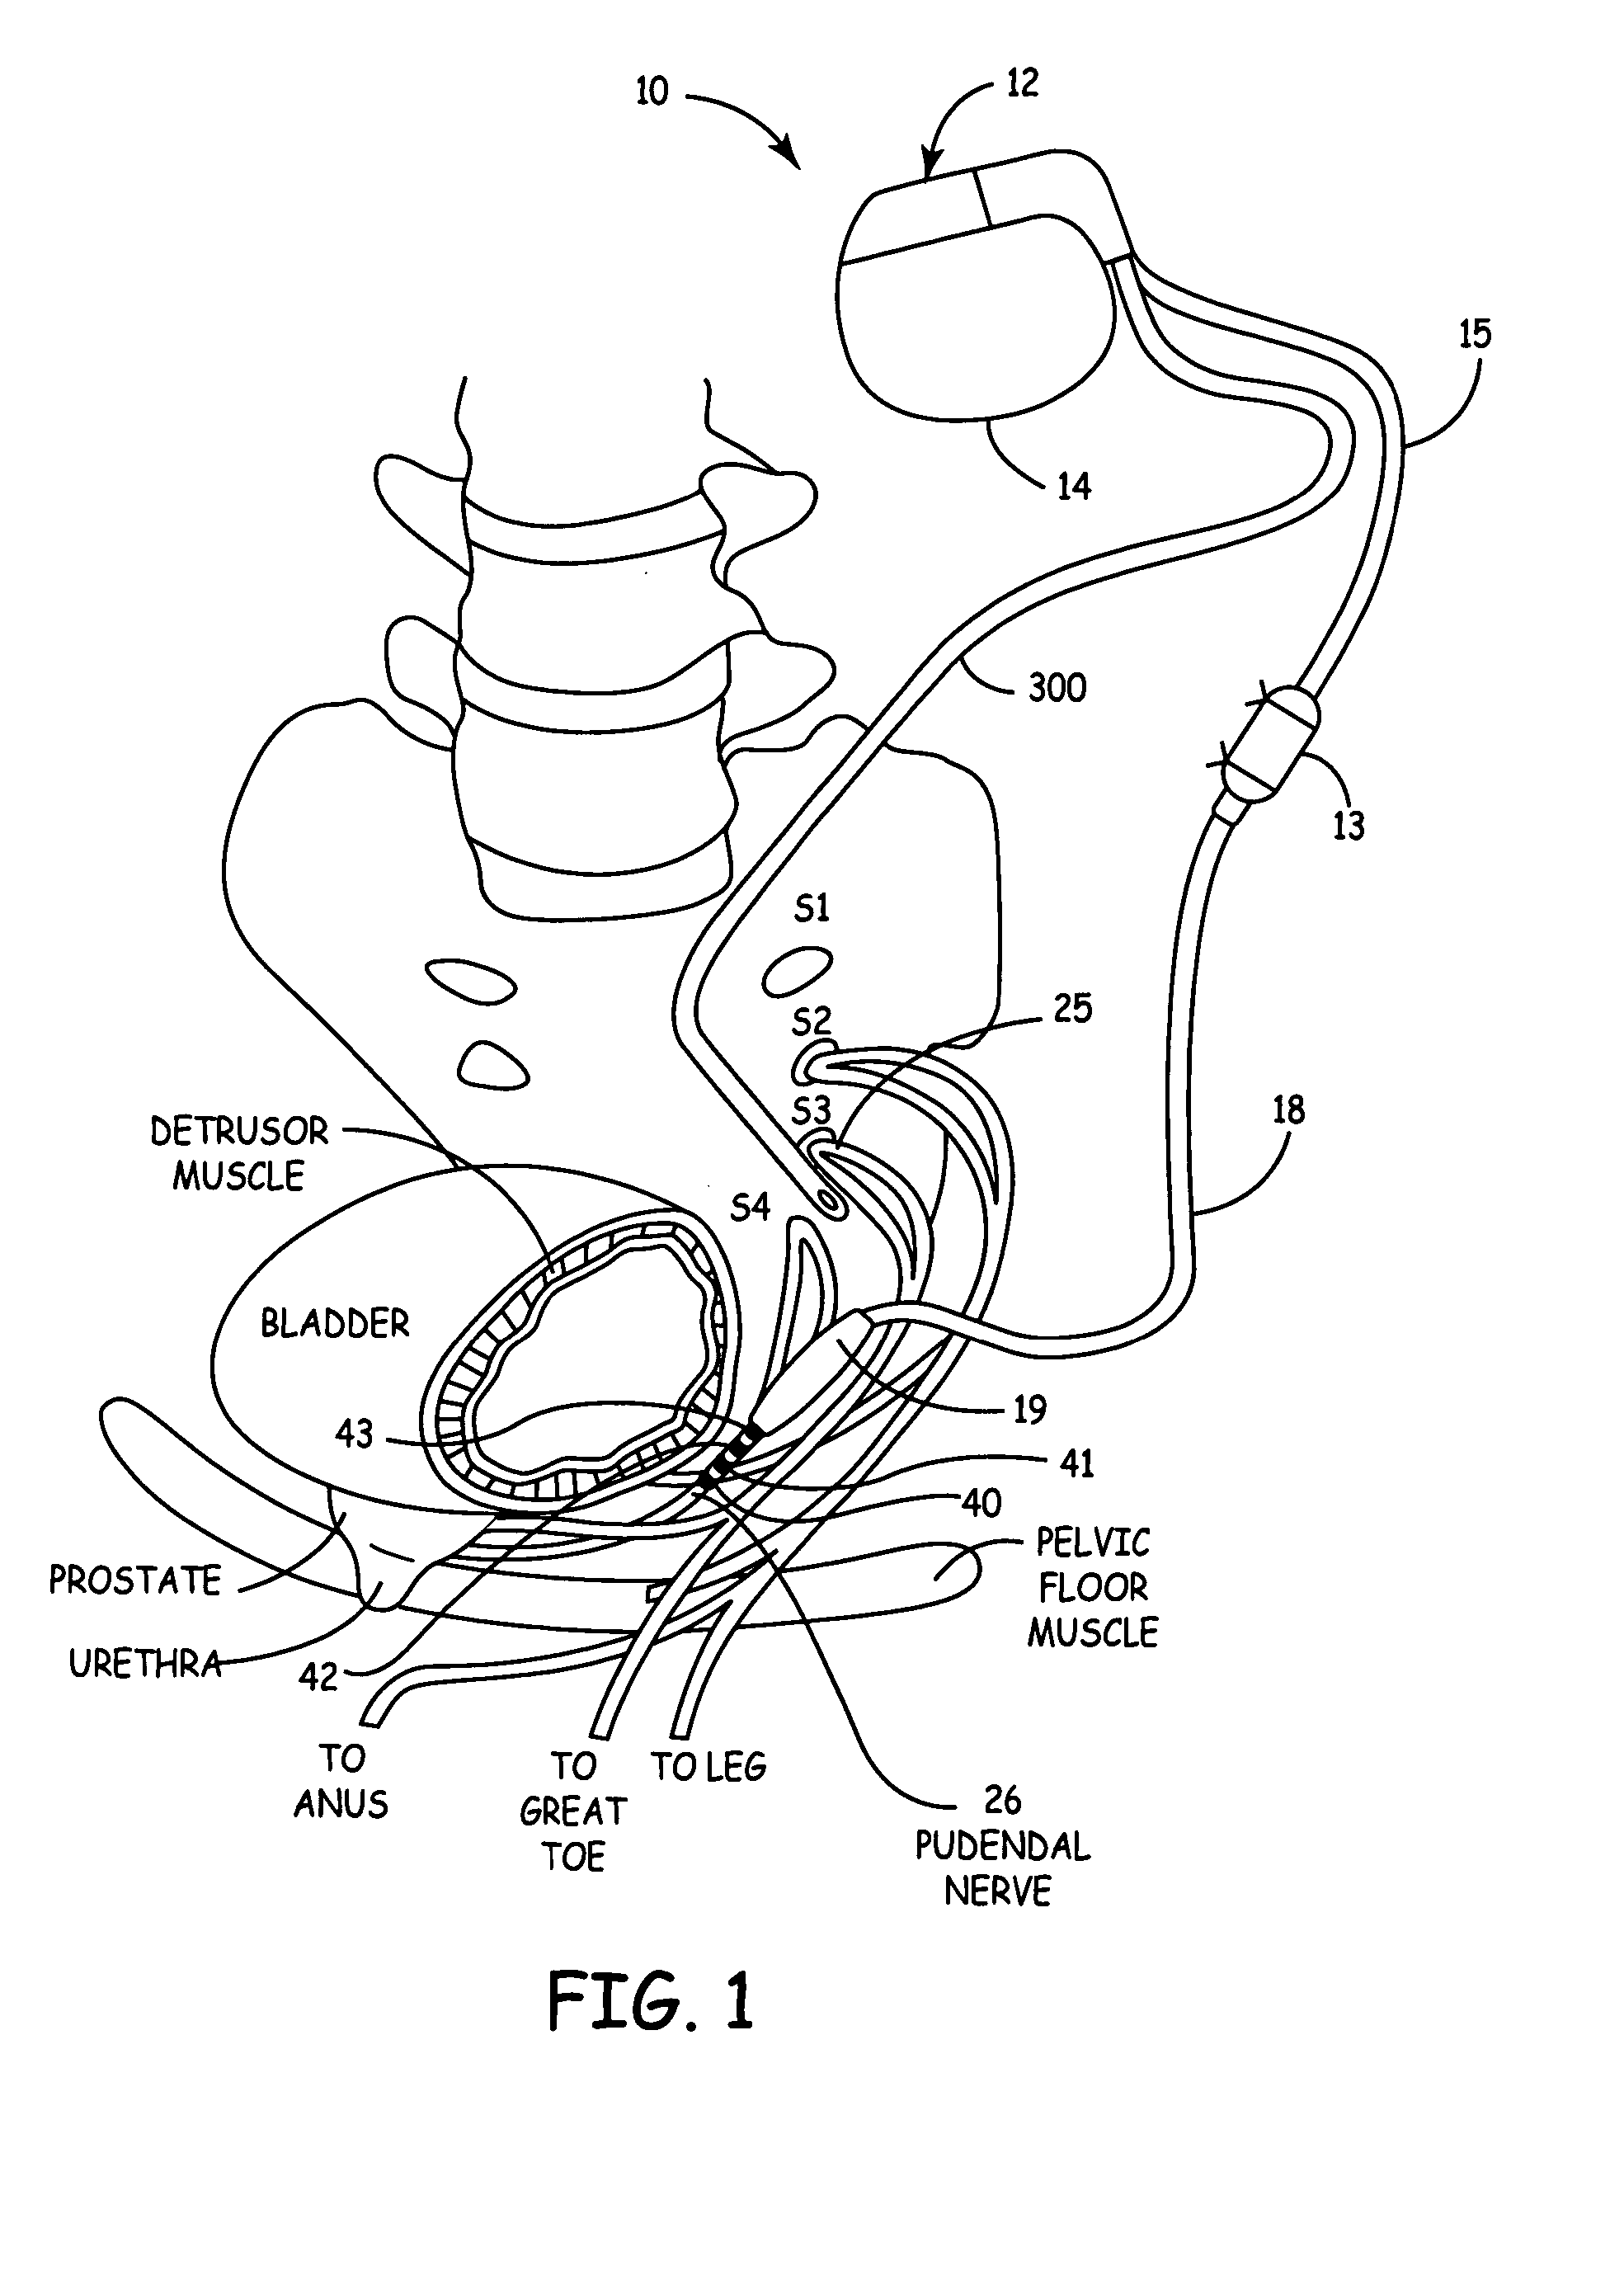 Method, system and device for treating disorders of the pelvic floor by delivering drugs to various nerves or tissues